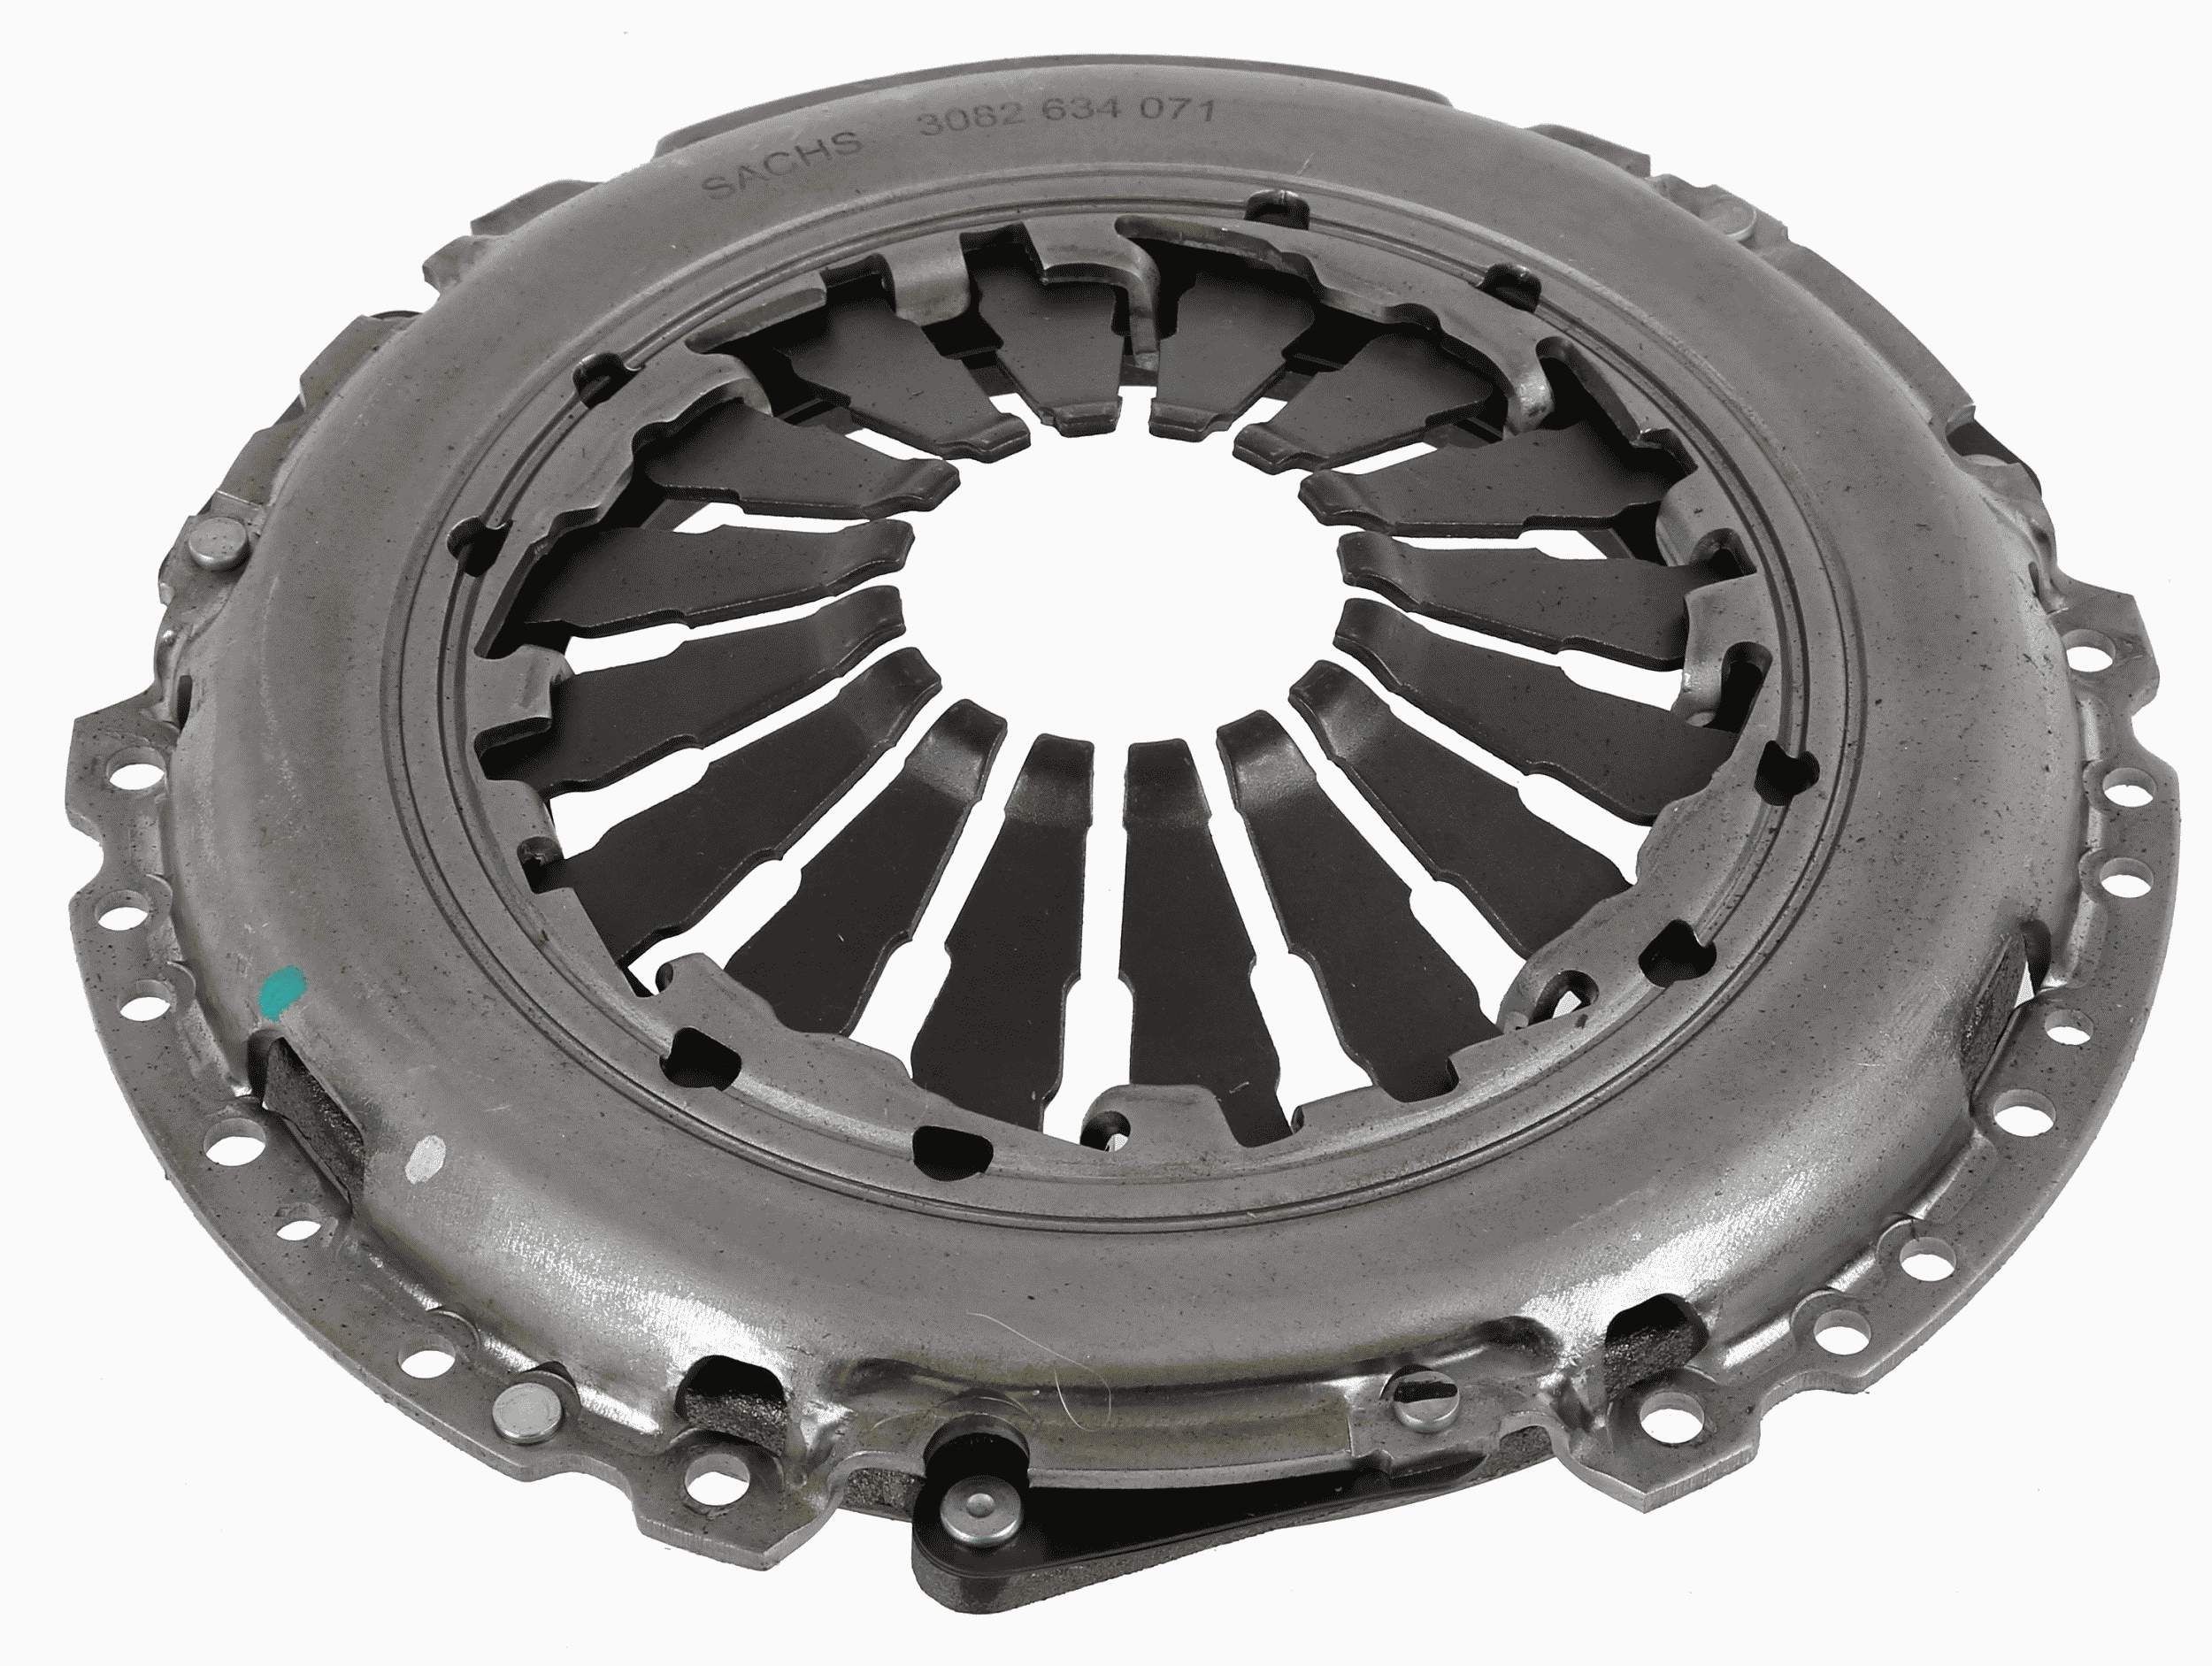 SACHS Clutch cover 3082 634 071 buy